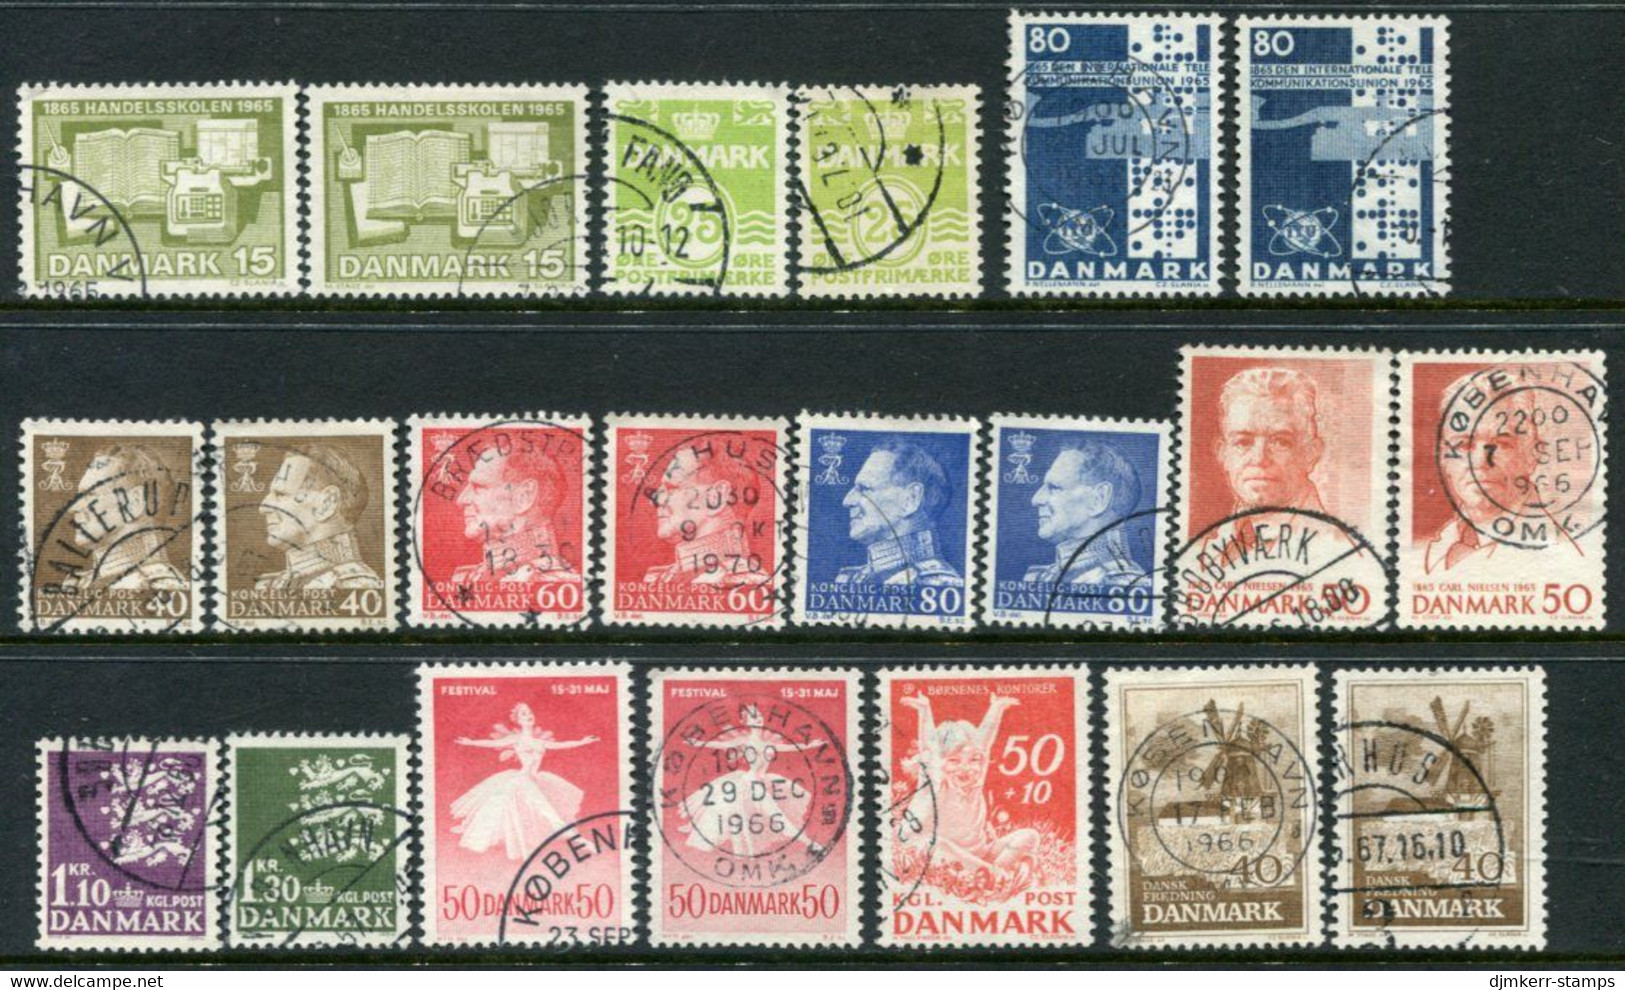 DENMARK 1965 Complete Issues With Ordinary And Fluorescent Papers, Used Michel 426x-437y - Used Stamps